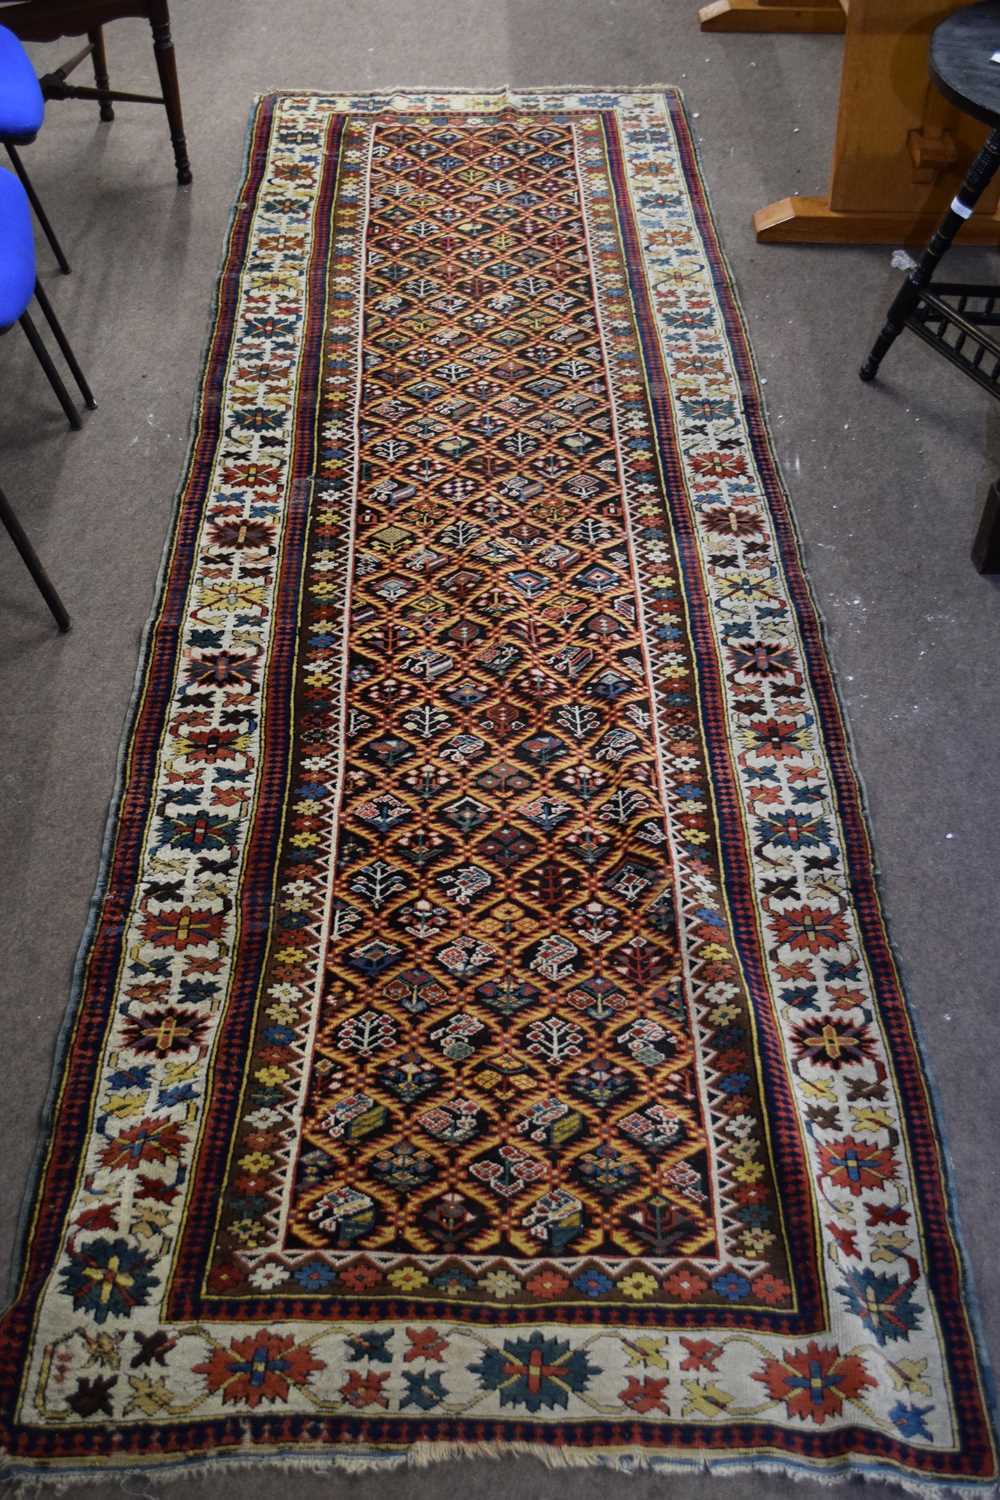 Antique Uzbek runner carpet decorated with large central panel, with stylised foliage detail